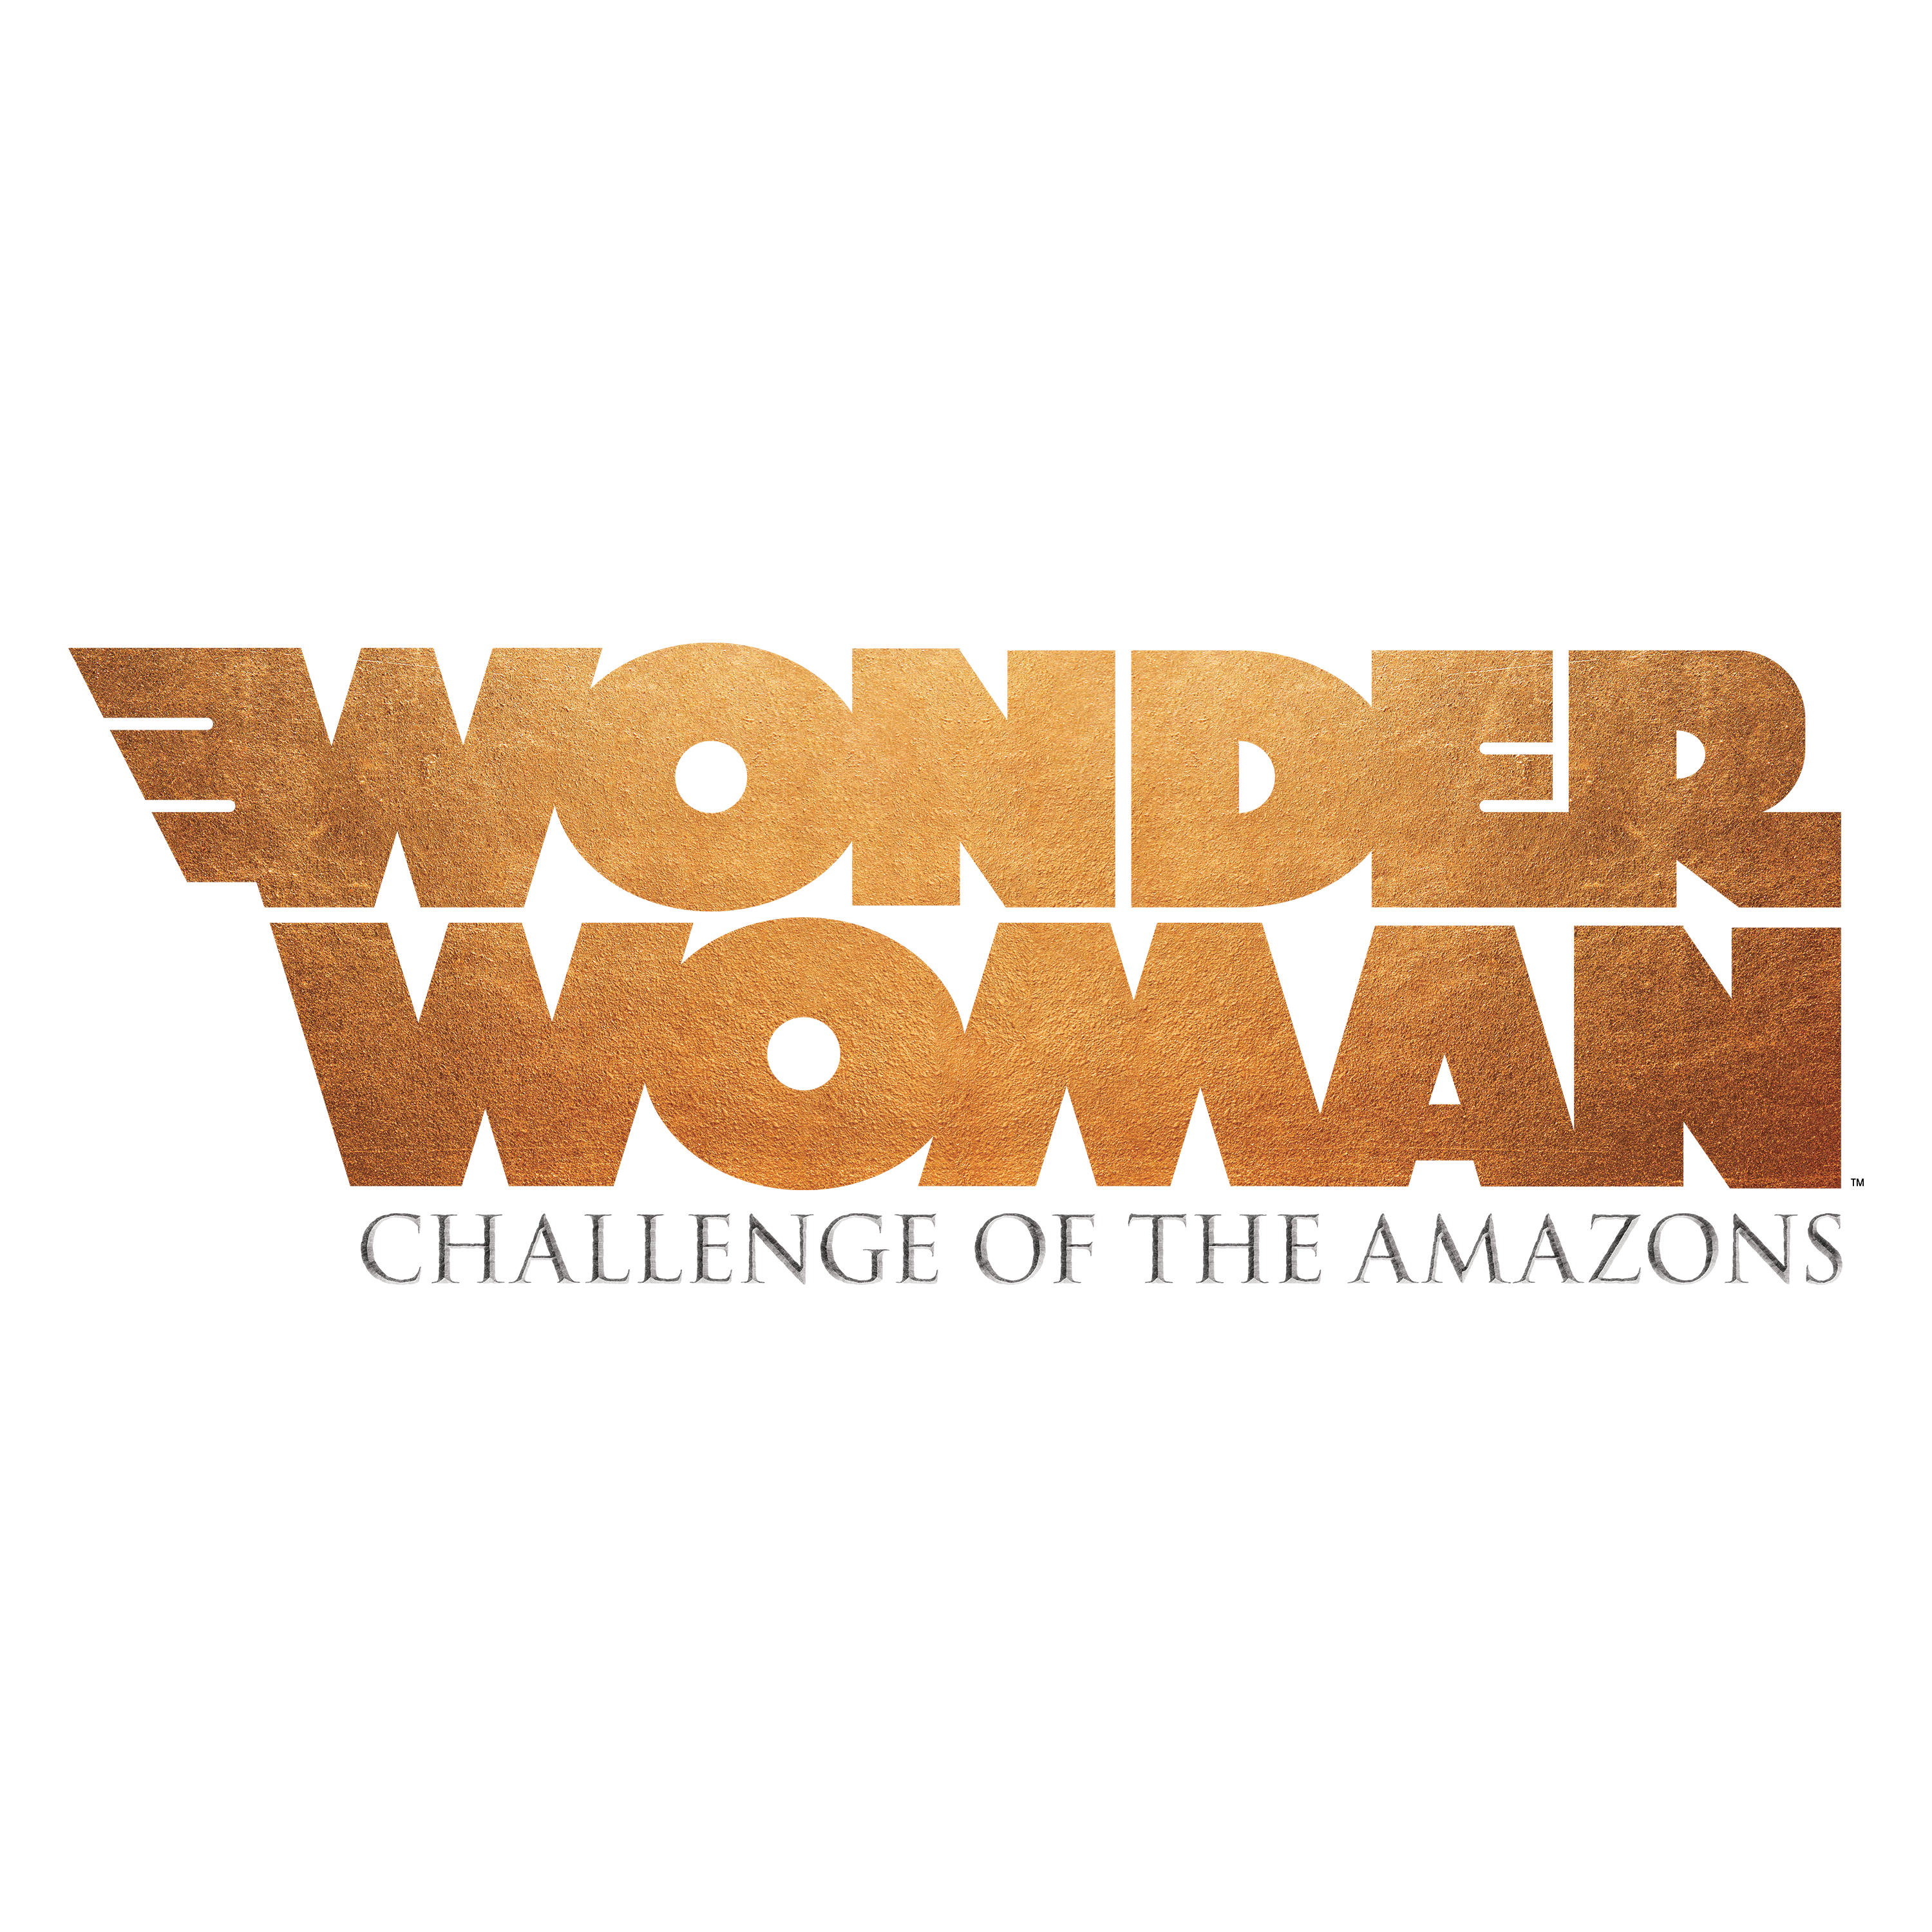 Wonder Woman Challenge of the s Board Game - Ravensburger DC